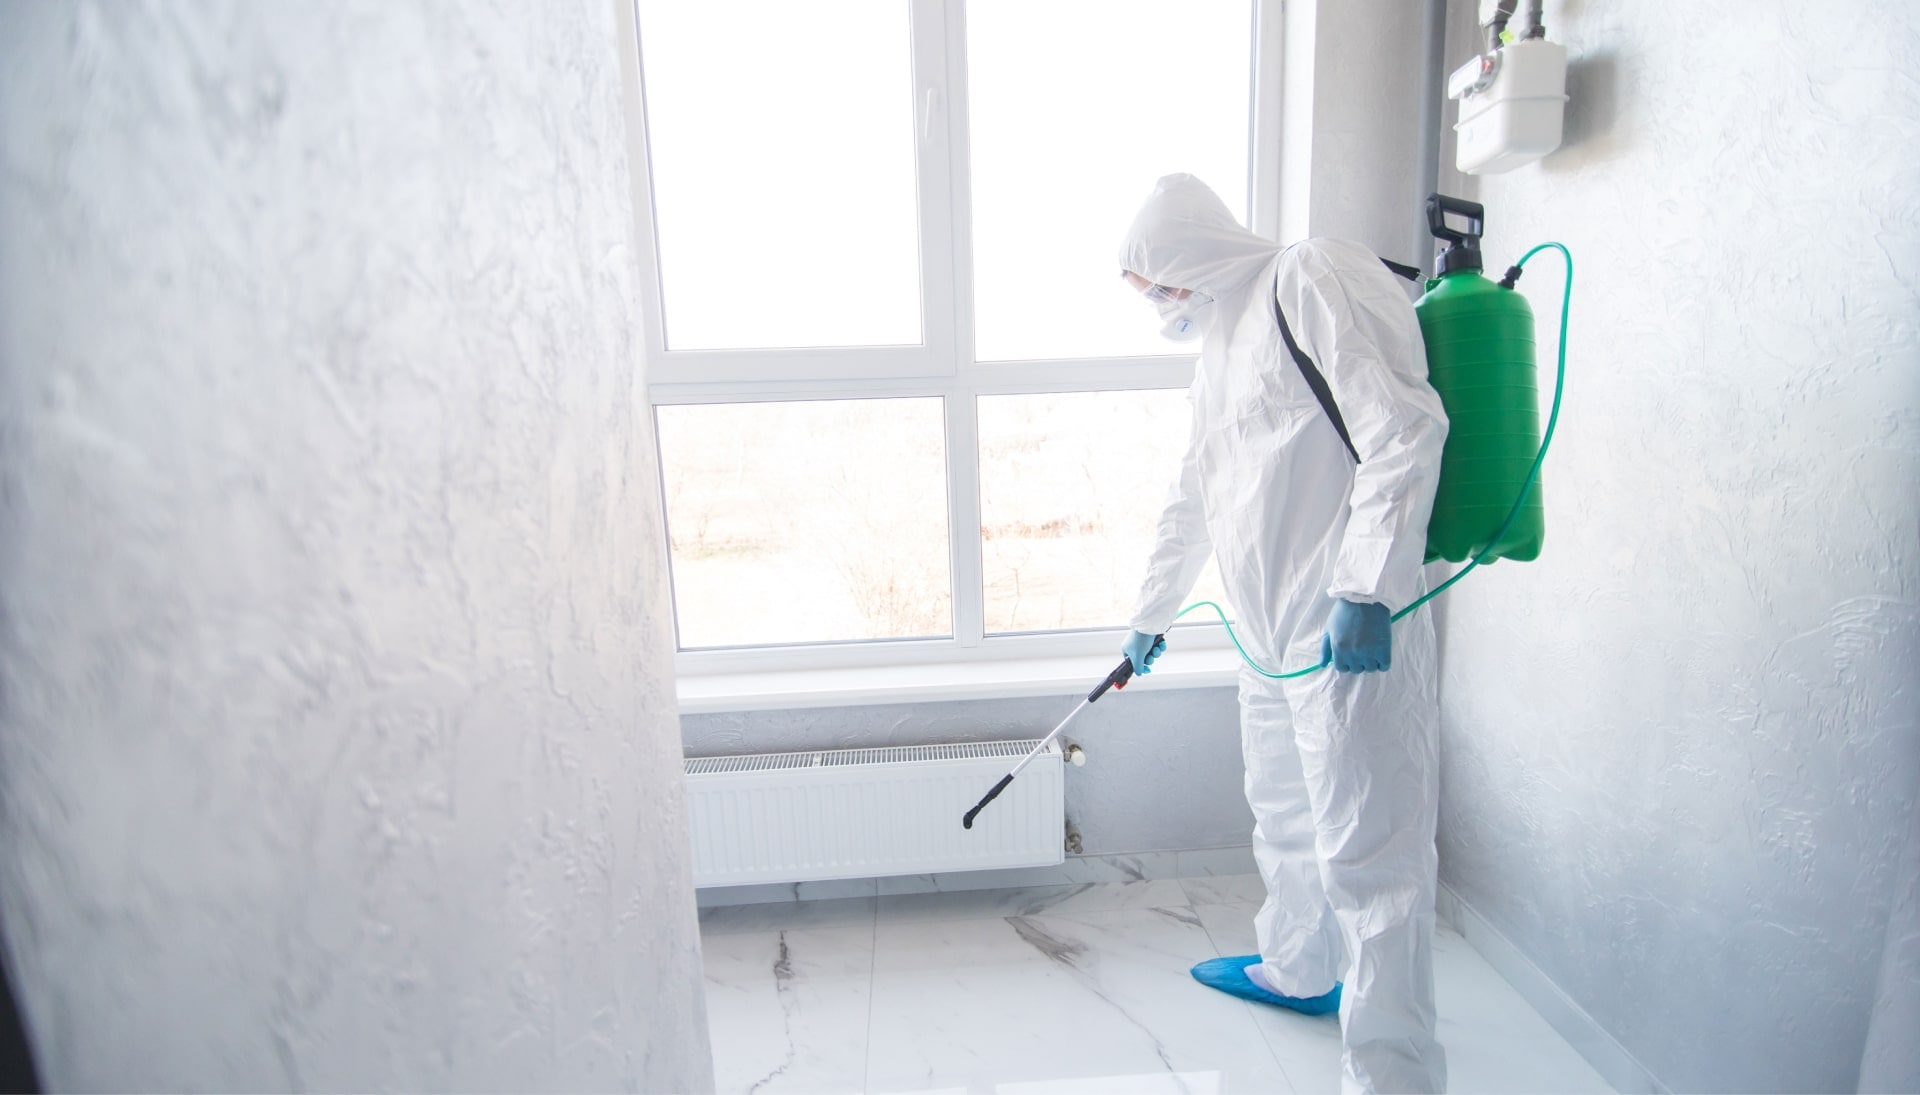 We provide the highest-quality mold inspection, testing, and removal services in the Philadelphia, Pennsylvania area.